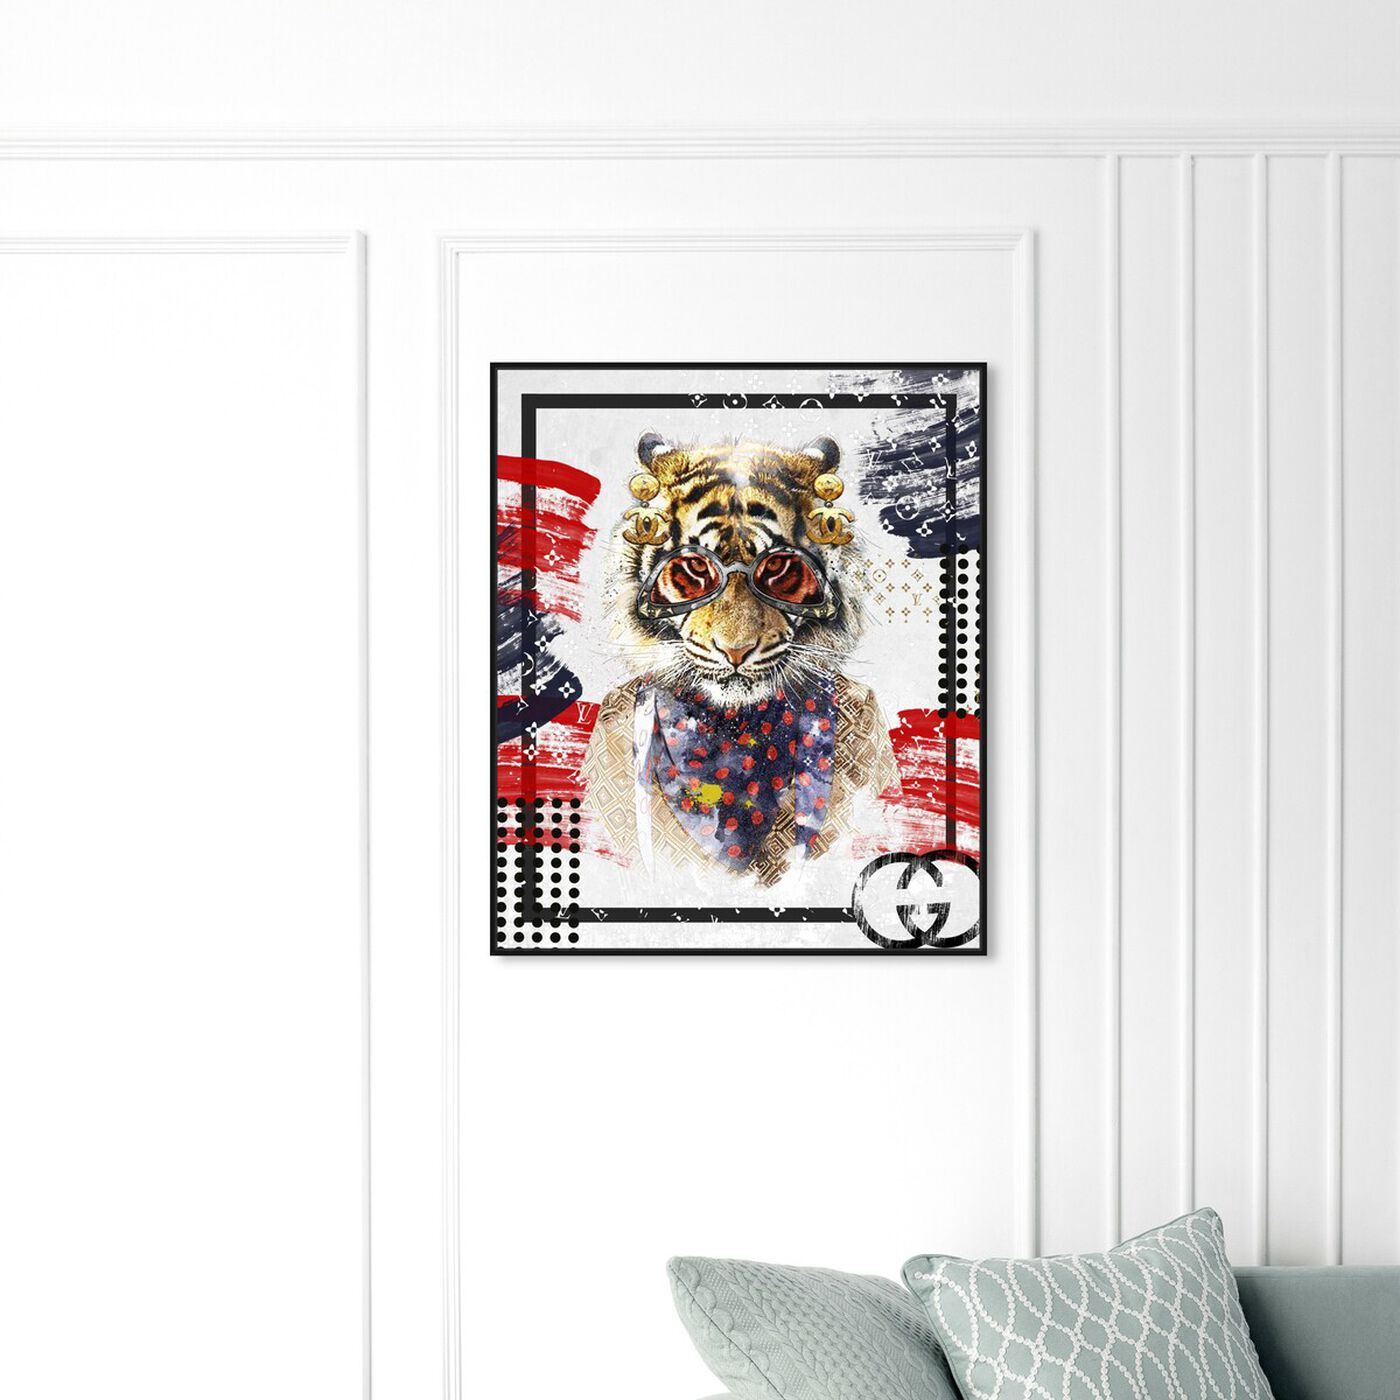 Hanging view of Luxe Cousin Portrait featuring animals and zoo and wild animals art.